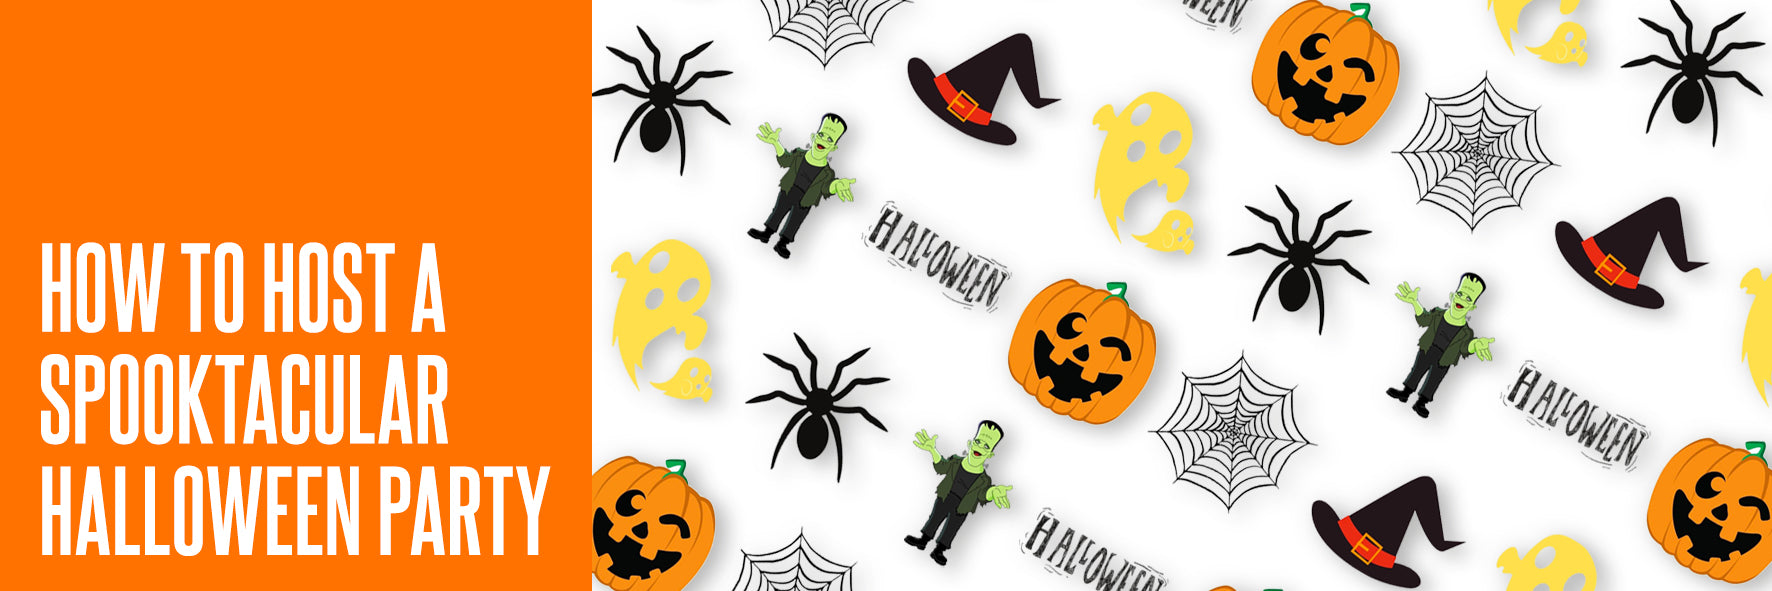 A Guide to Spooktacular Halloween Party Decorations